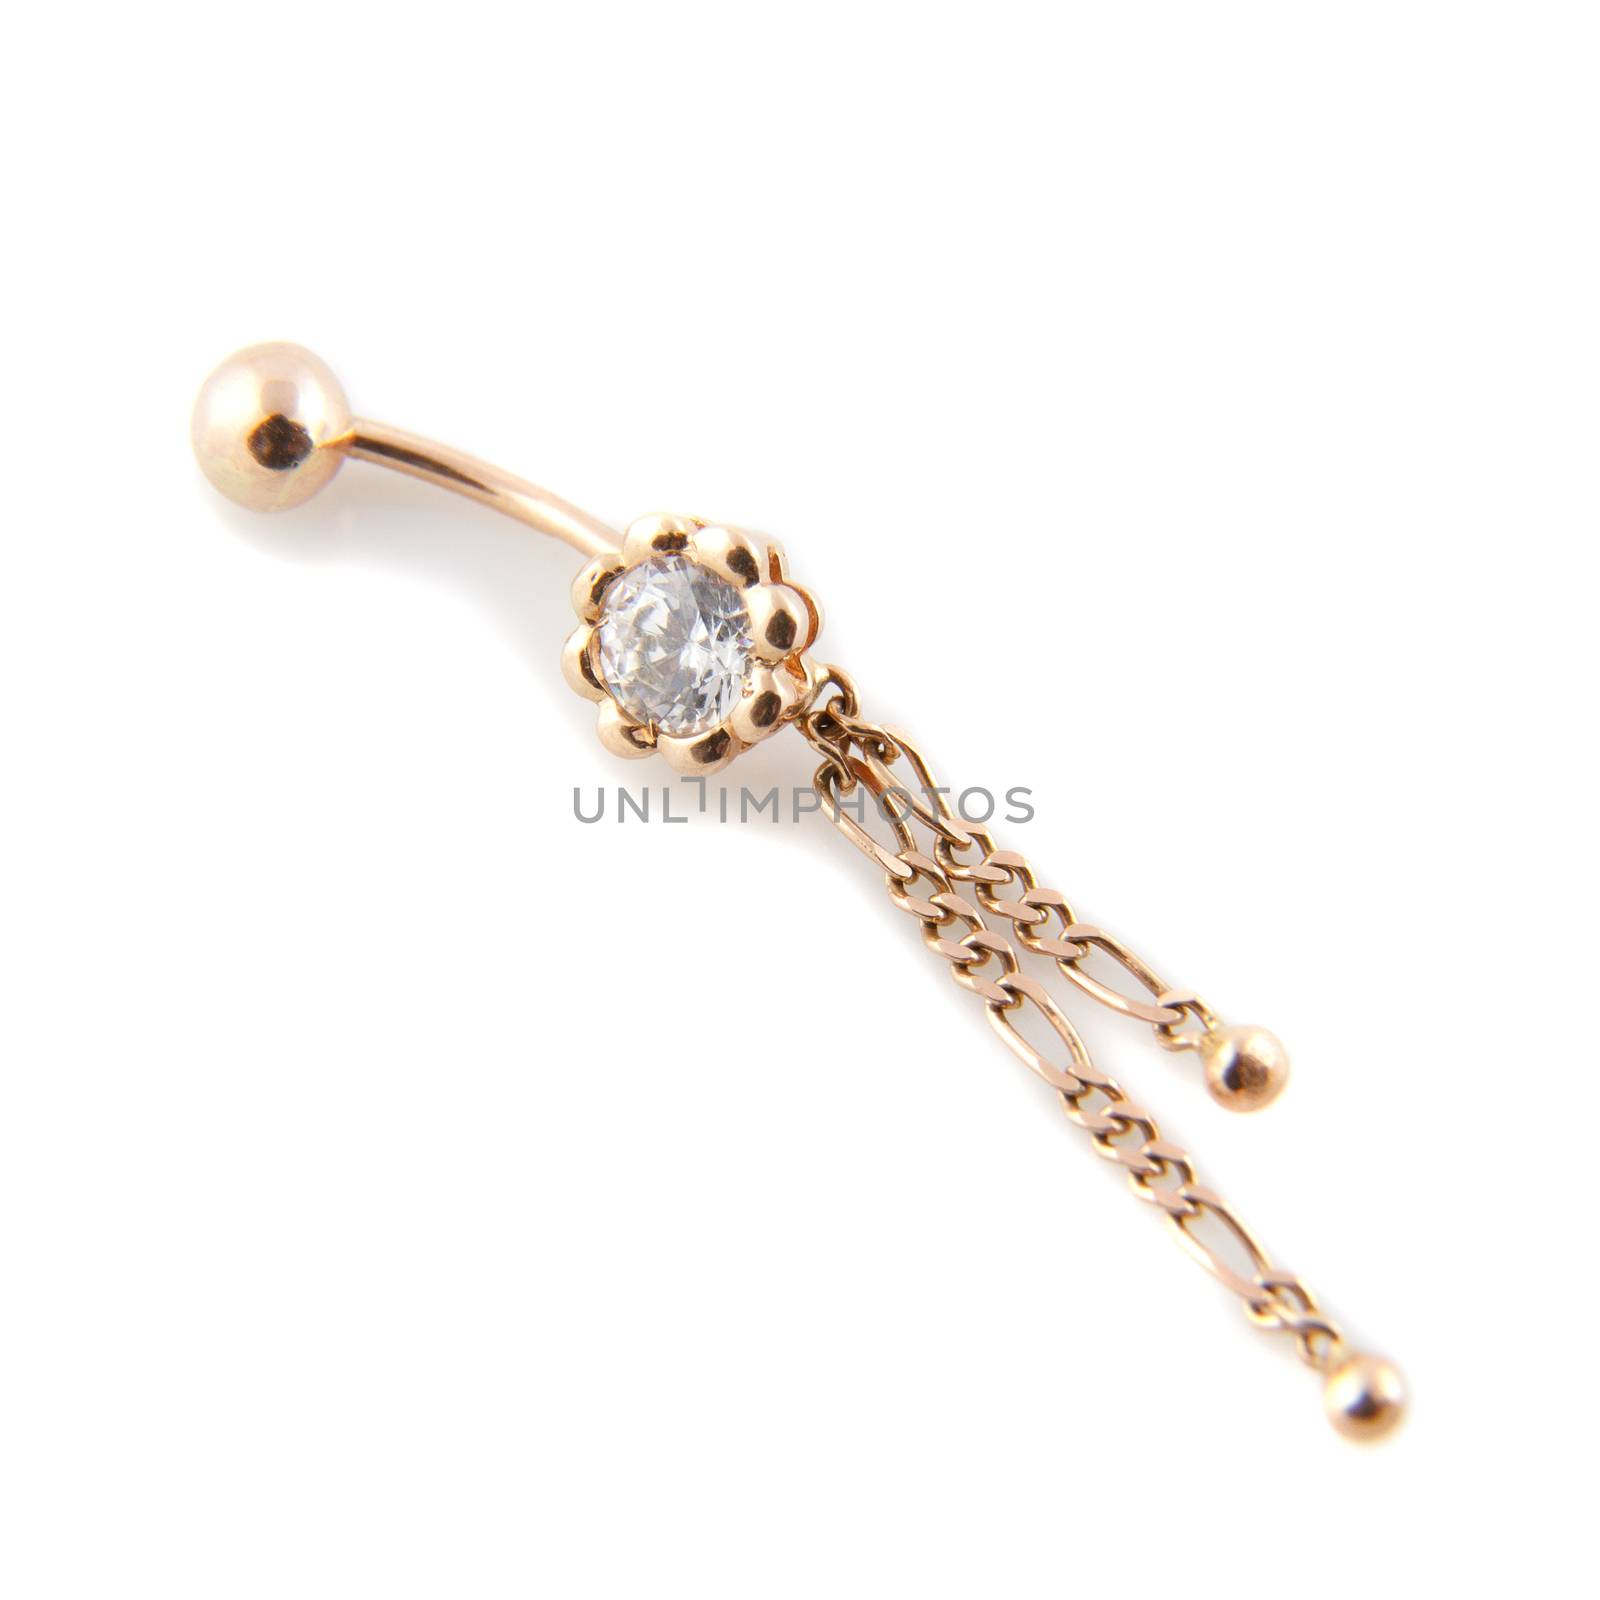 A golden piercing with a beautiful gem stone